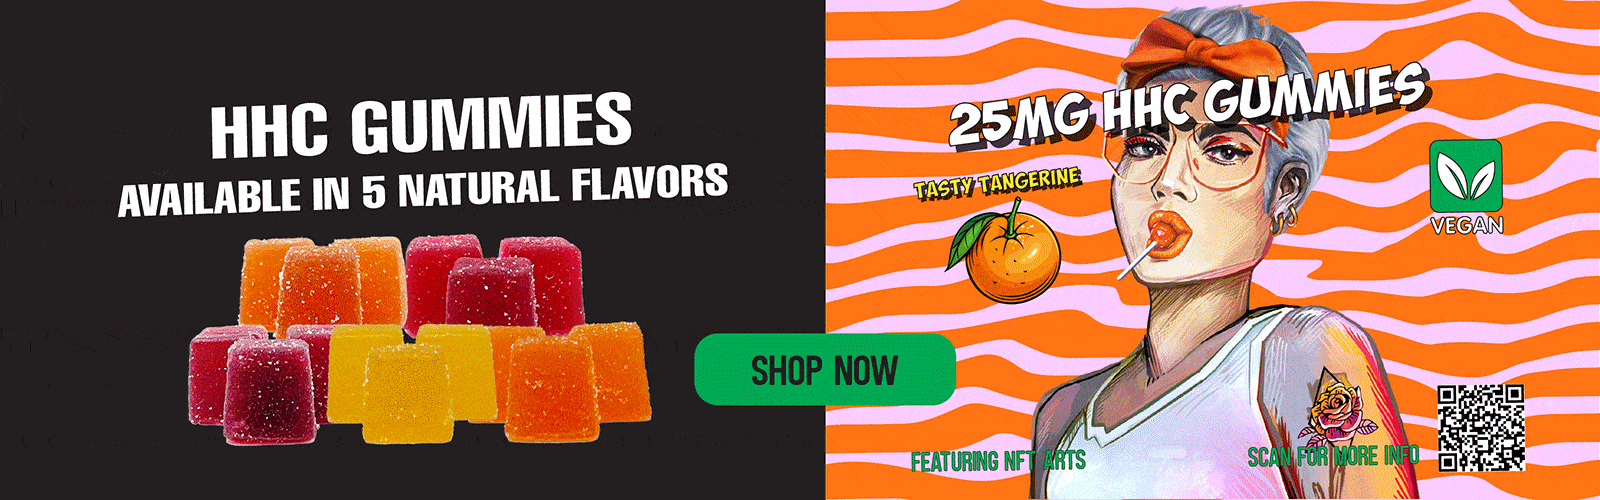 420 Sale - Goodcbd.com - up to 60% off sitewide